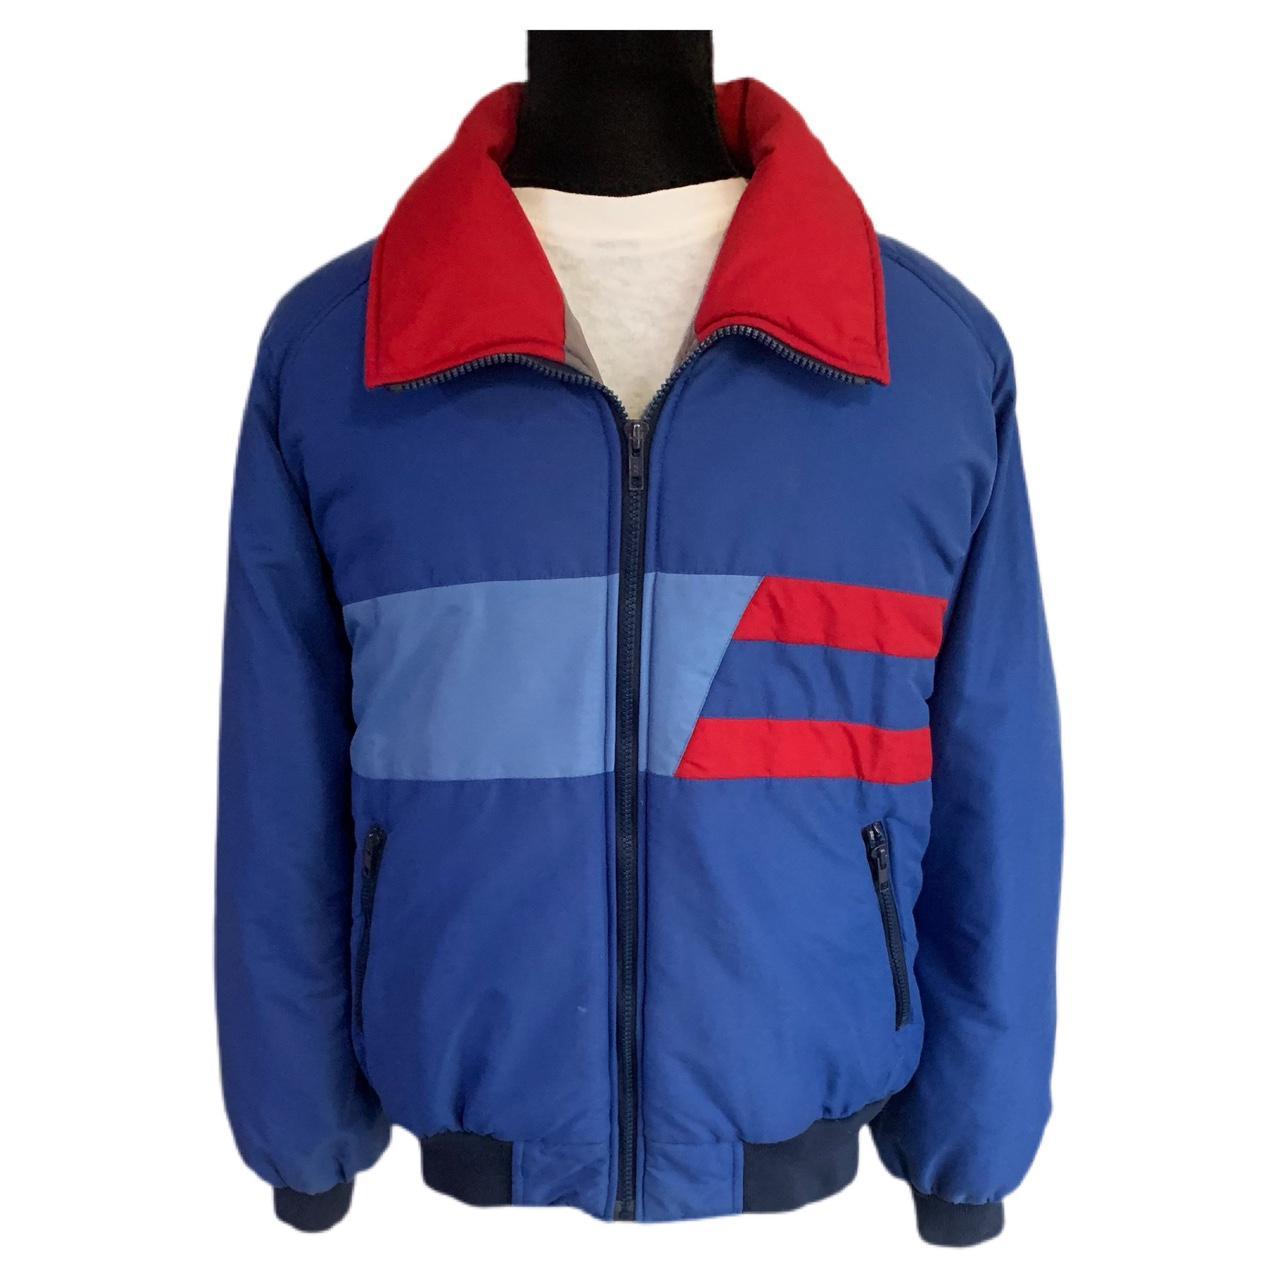 Men's Blue and Red Jacket